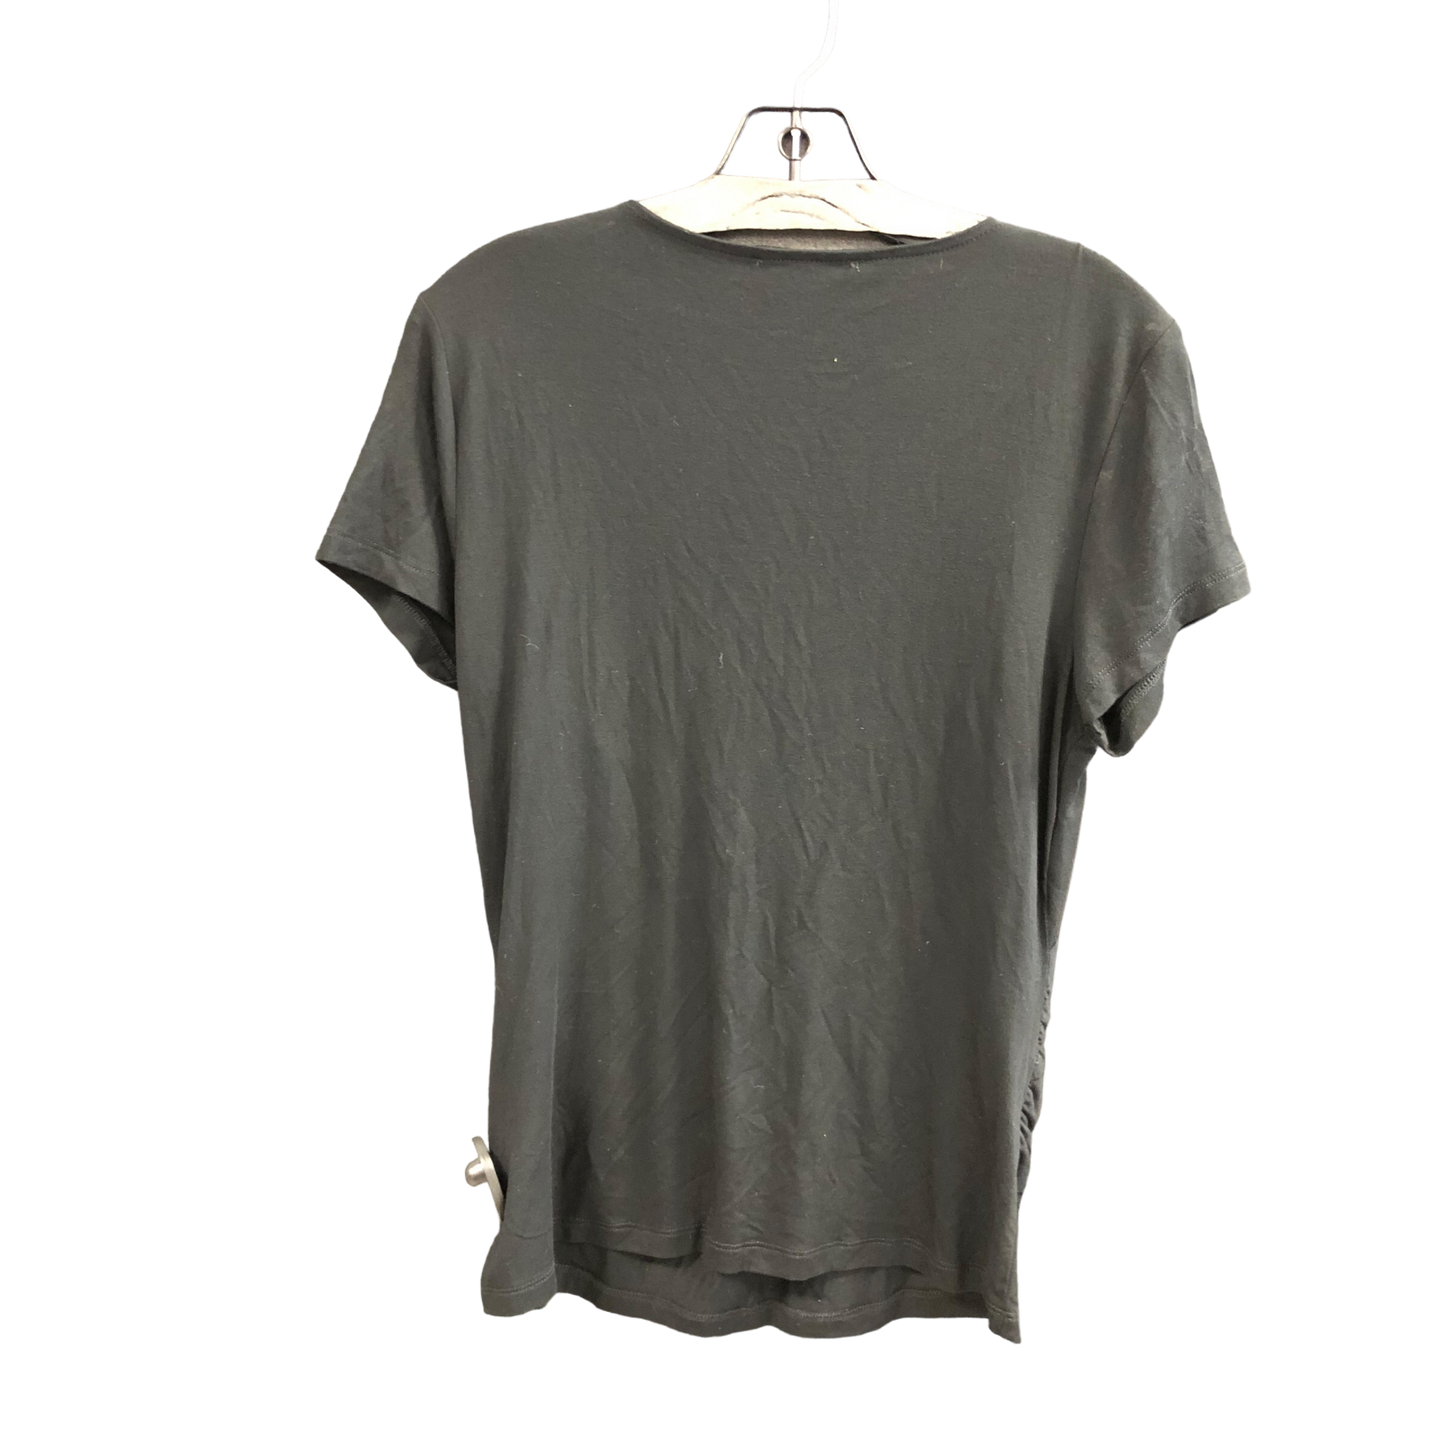 Black Top Short Sleeve Cable And Gauge, Size L